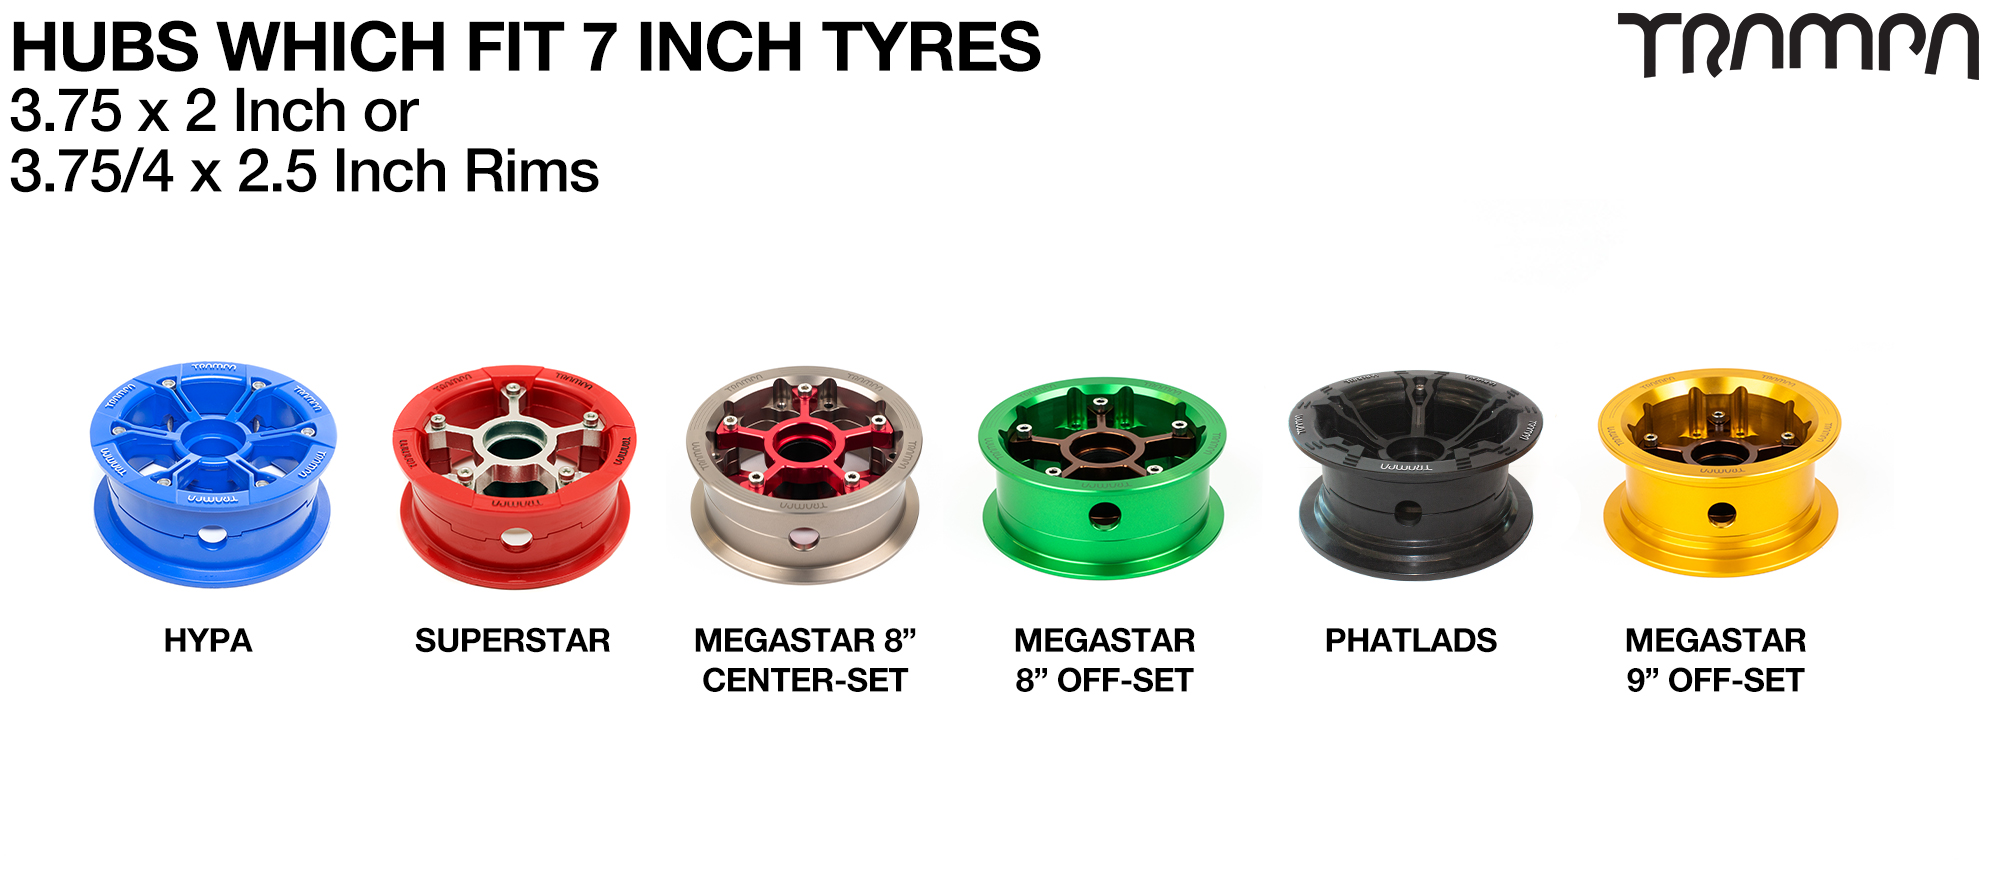 TRAMPA MUD-PLUGGER 7 Inch Tyre measures 3.75x 1.75x 7 Inch or 175x 45mm with 3.75 inch Rim & fits all 3.75 inch Hubs